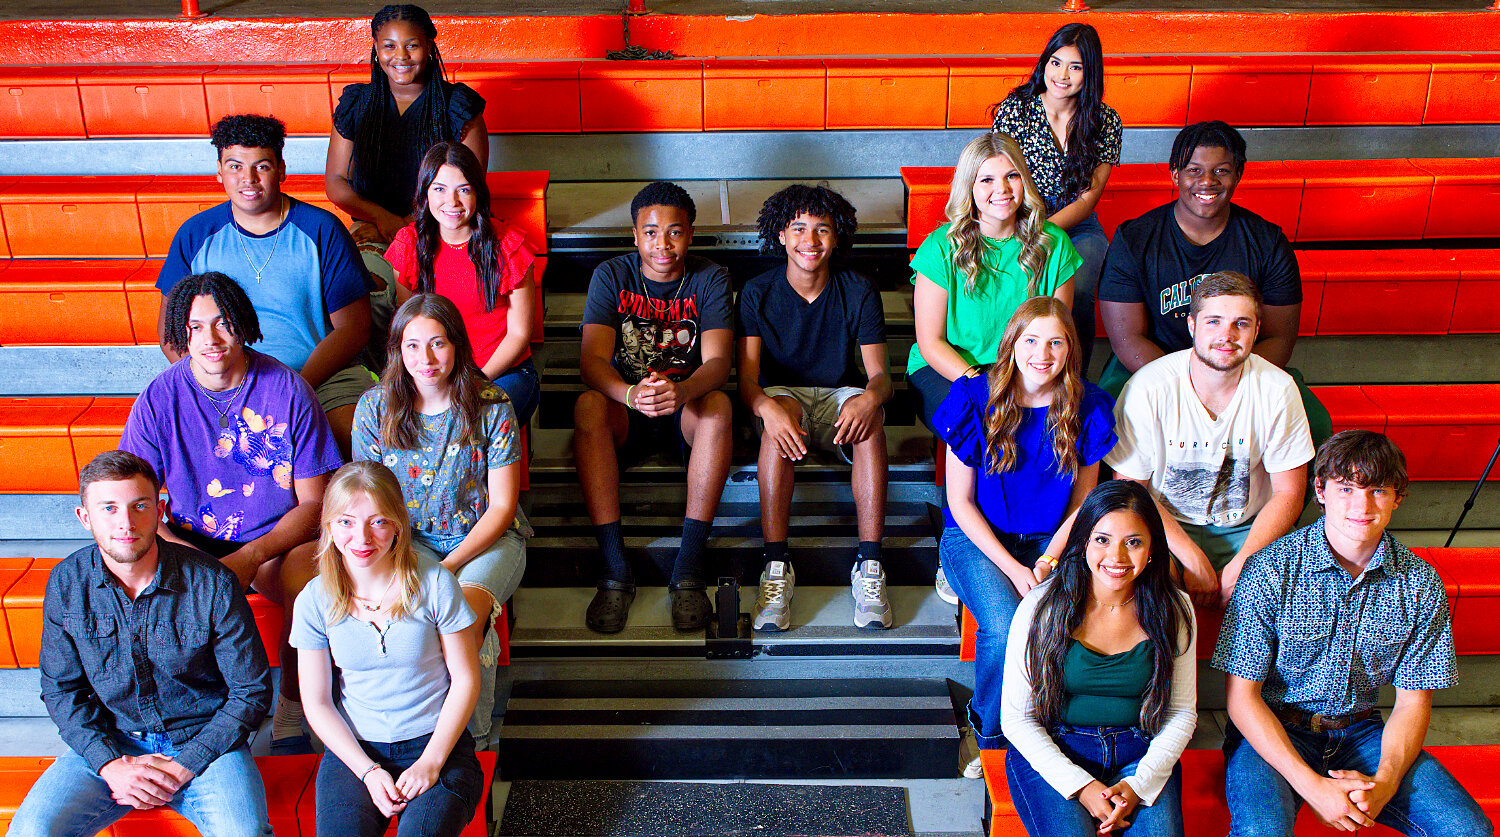 The senior king and queen nominees and dukes and duchesses from the lower grades sit in the shape of the letter "m" top from left, freshman duchess, Zion Olajide; sophomore duchess, Katie Rojas; 3rd row from right, junior duke, Javaryon Brumsey; junior duchess, Myah Joyner; sophomore duke, Ainsley Steward; freshman duke, Cameron Kelley; king and queen nominees, Jaycee Smith, Luke Beckley; 2nd row, from left, Braydon Alley, Jada Woodward, Macy Fischer, Paul Stanley; front row, Joshua Burge, Kayla Clark, Mariana Delgadillo and Seth Estoll.